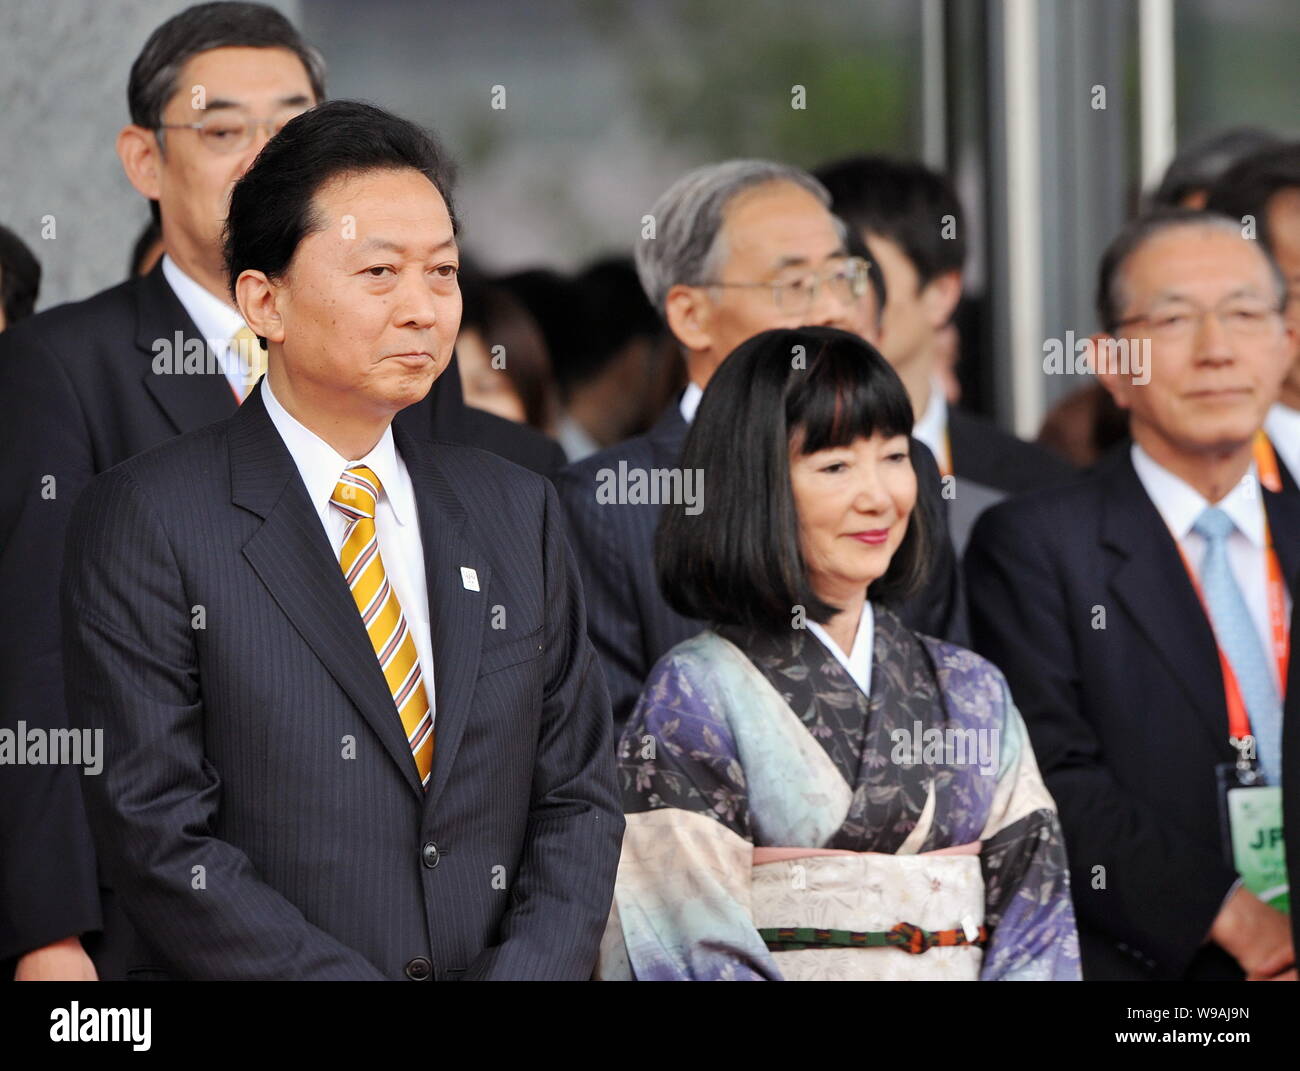 Former Japanese Prime Minister Yukio Hatoyama (L) and wife Miyuki Hatoyama are seen during an event celebrating the Japan Pavilion Day in the Expo sit Stock Photo